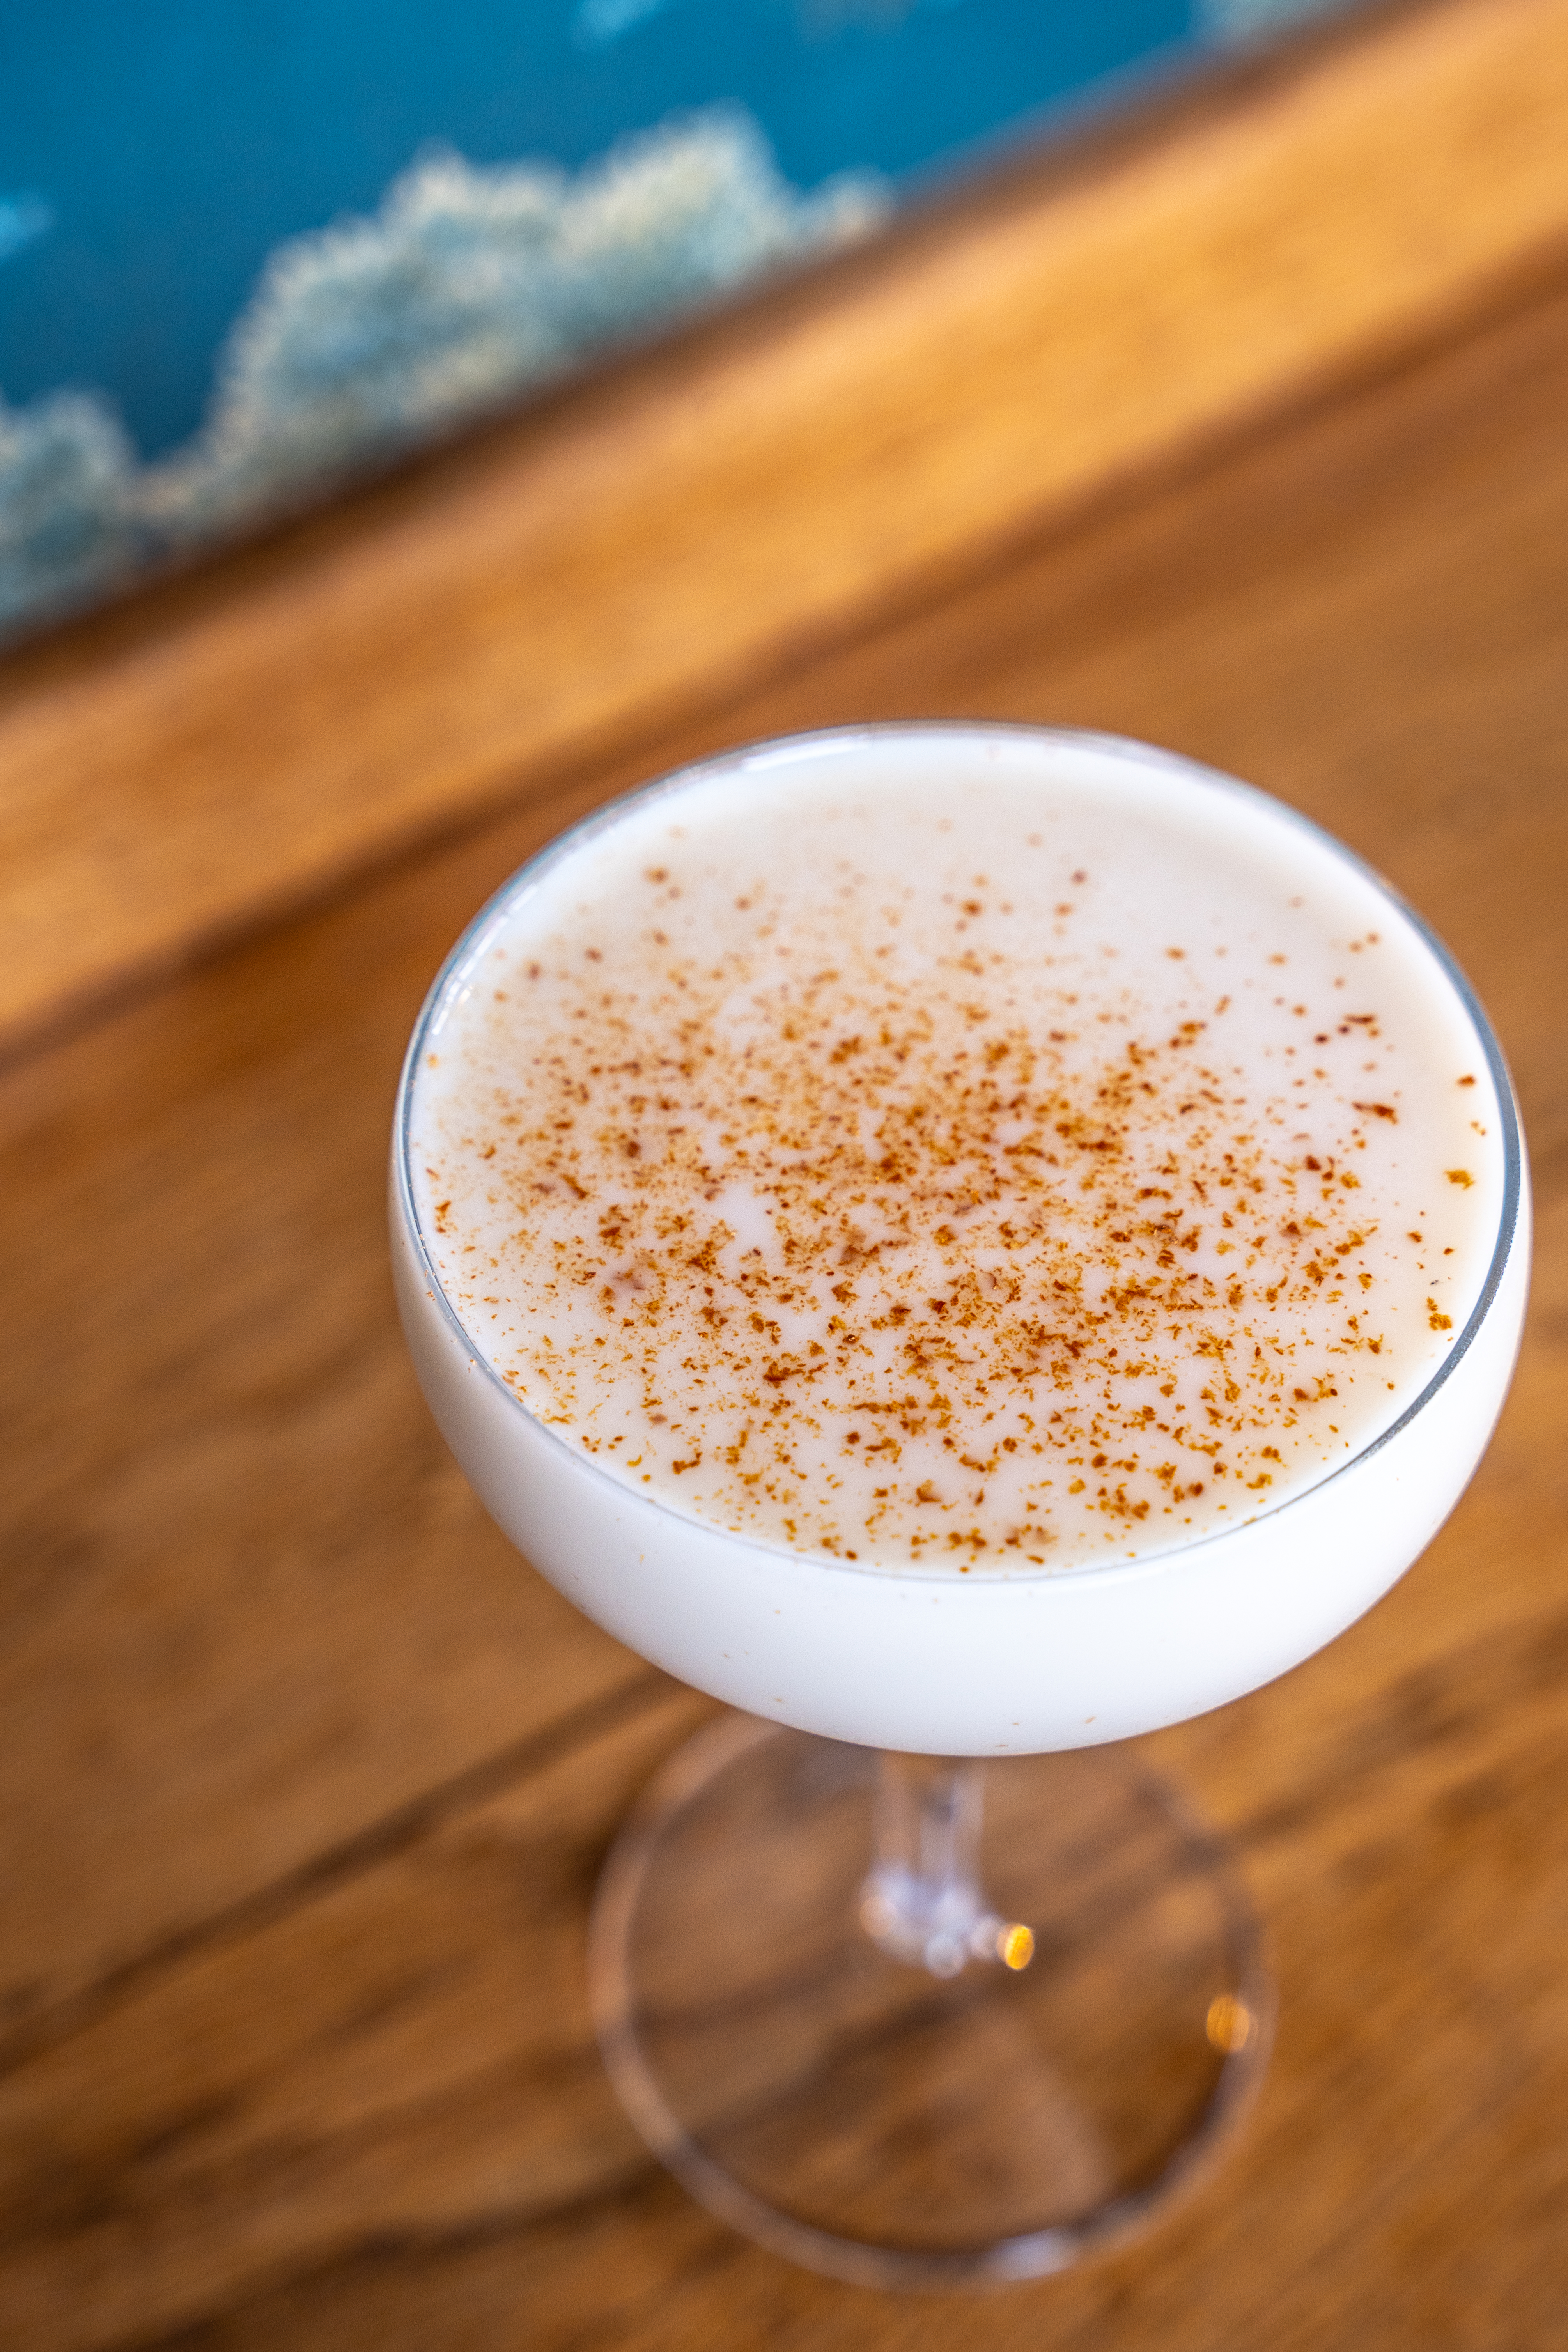 From above we can see a small coupe glass on a wooden surface. The glass is filled with a white drink and is garnished with a sprinkle of macadamia nuts. 